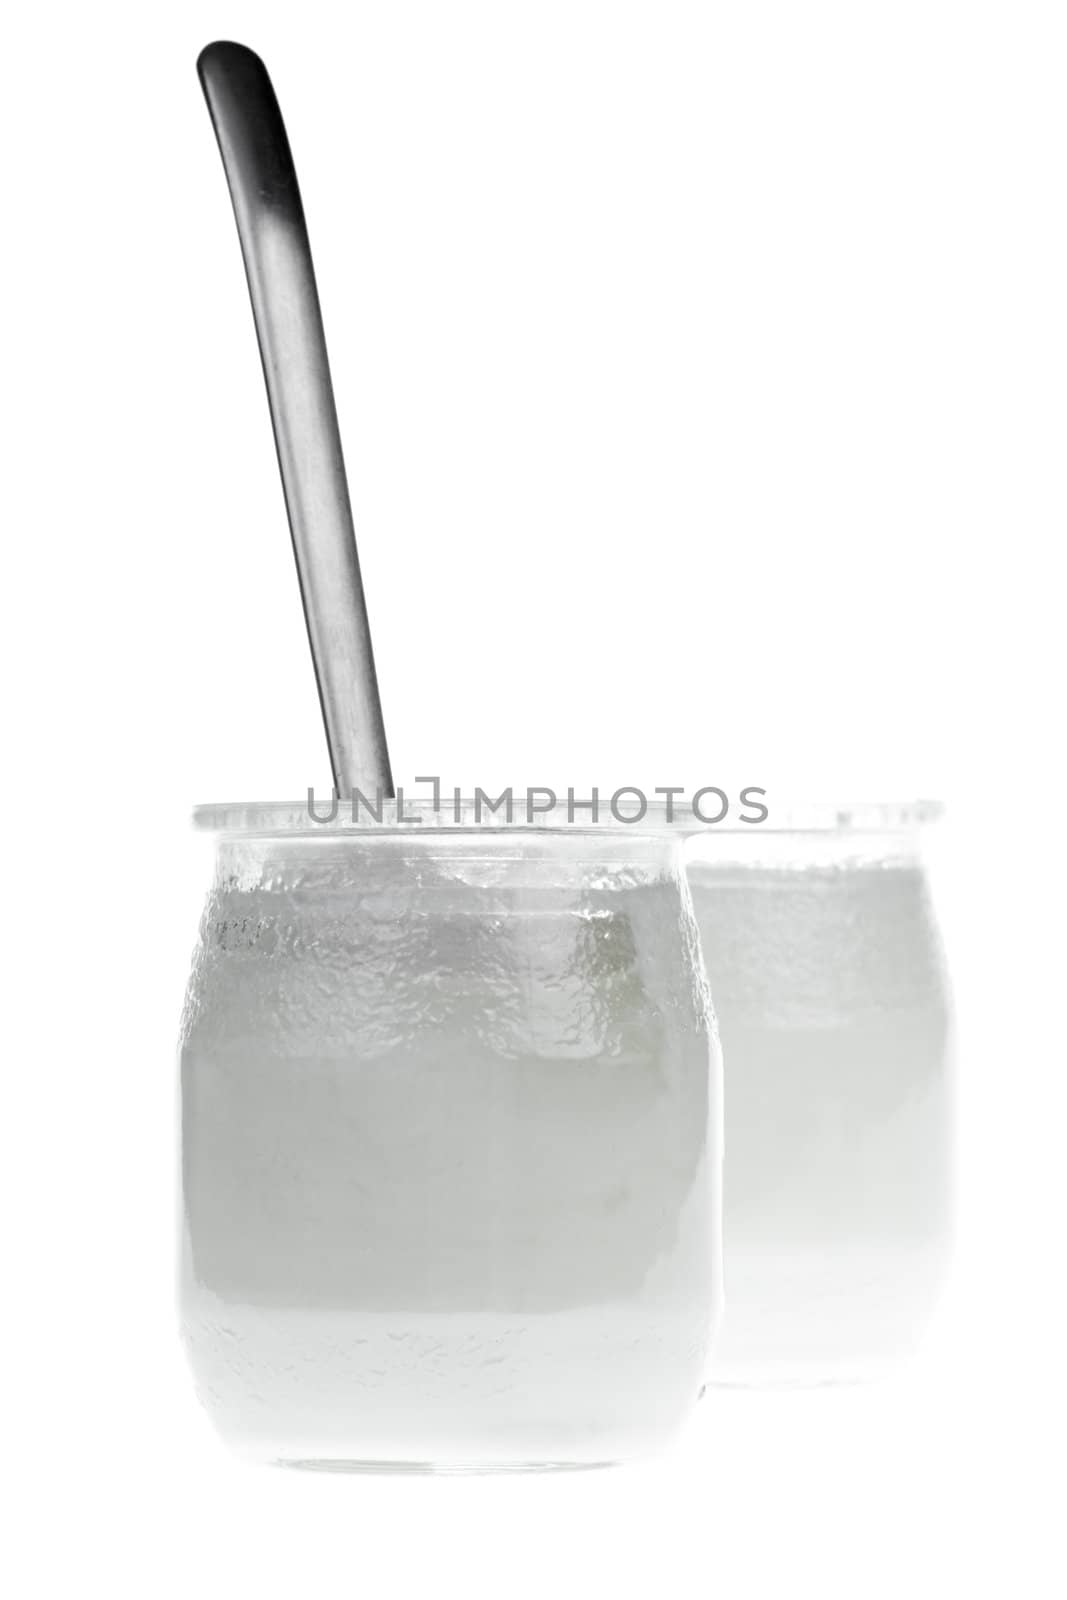 Old-fashioned yogurt jars with spoon on white background